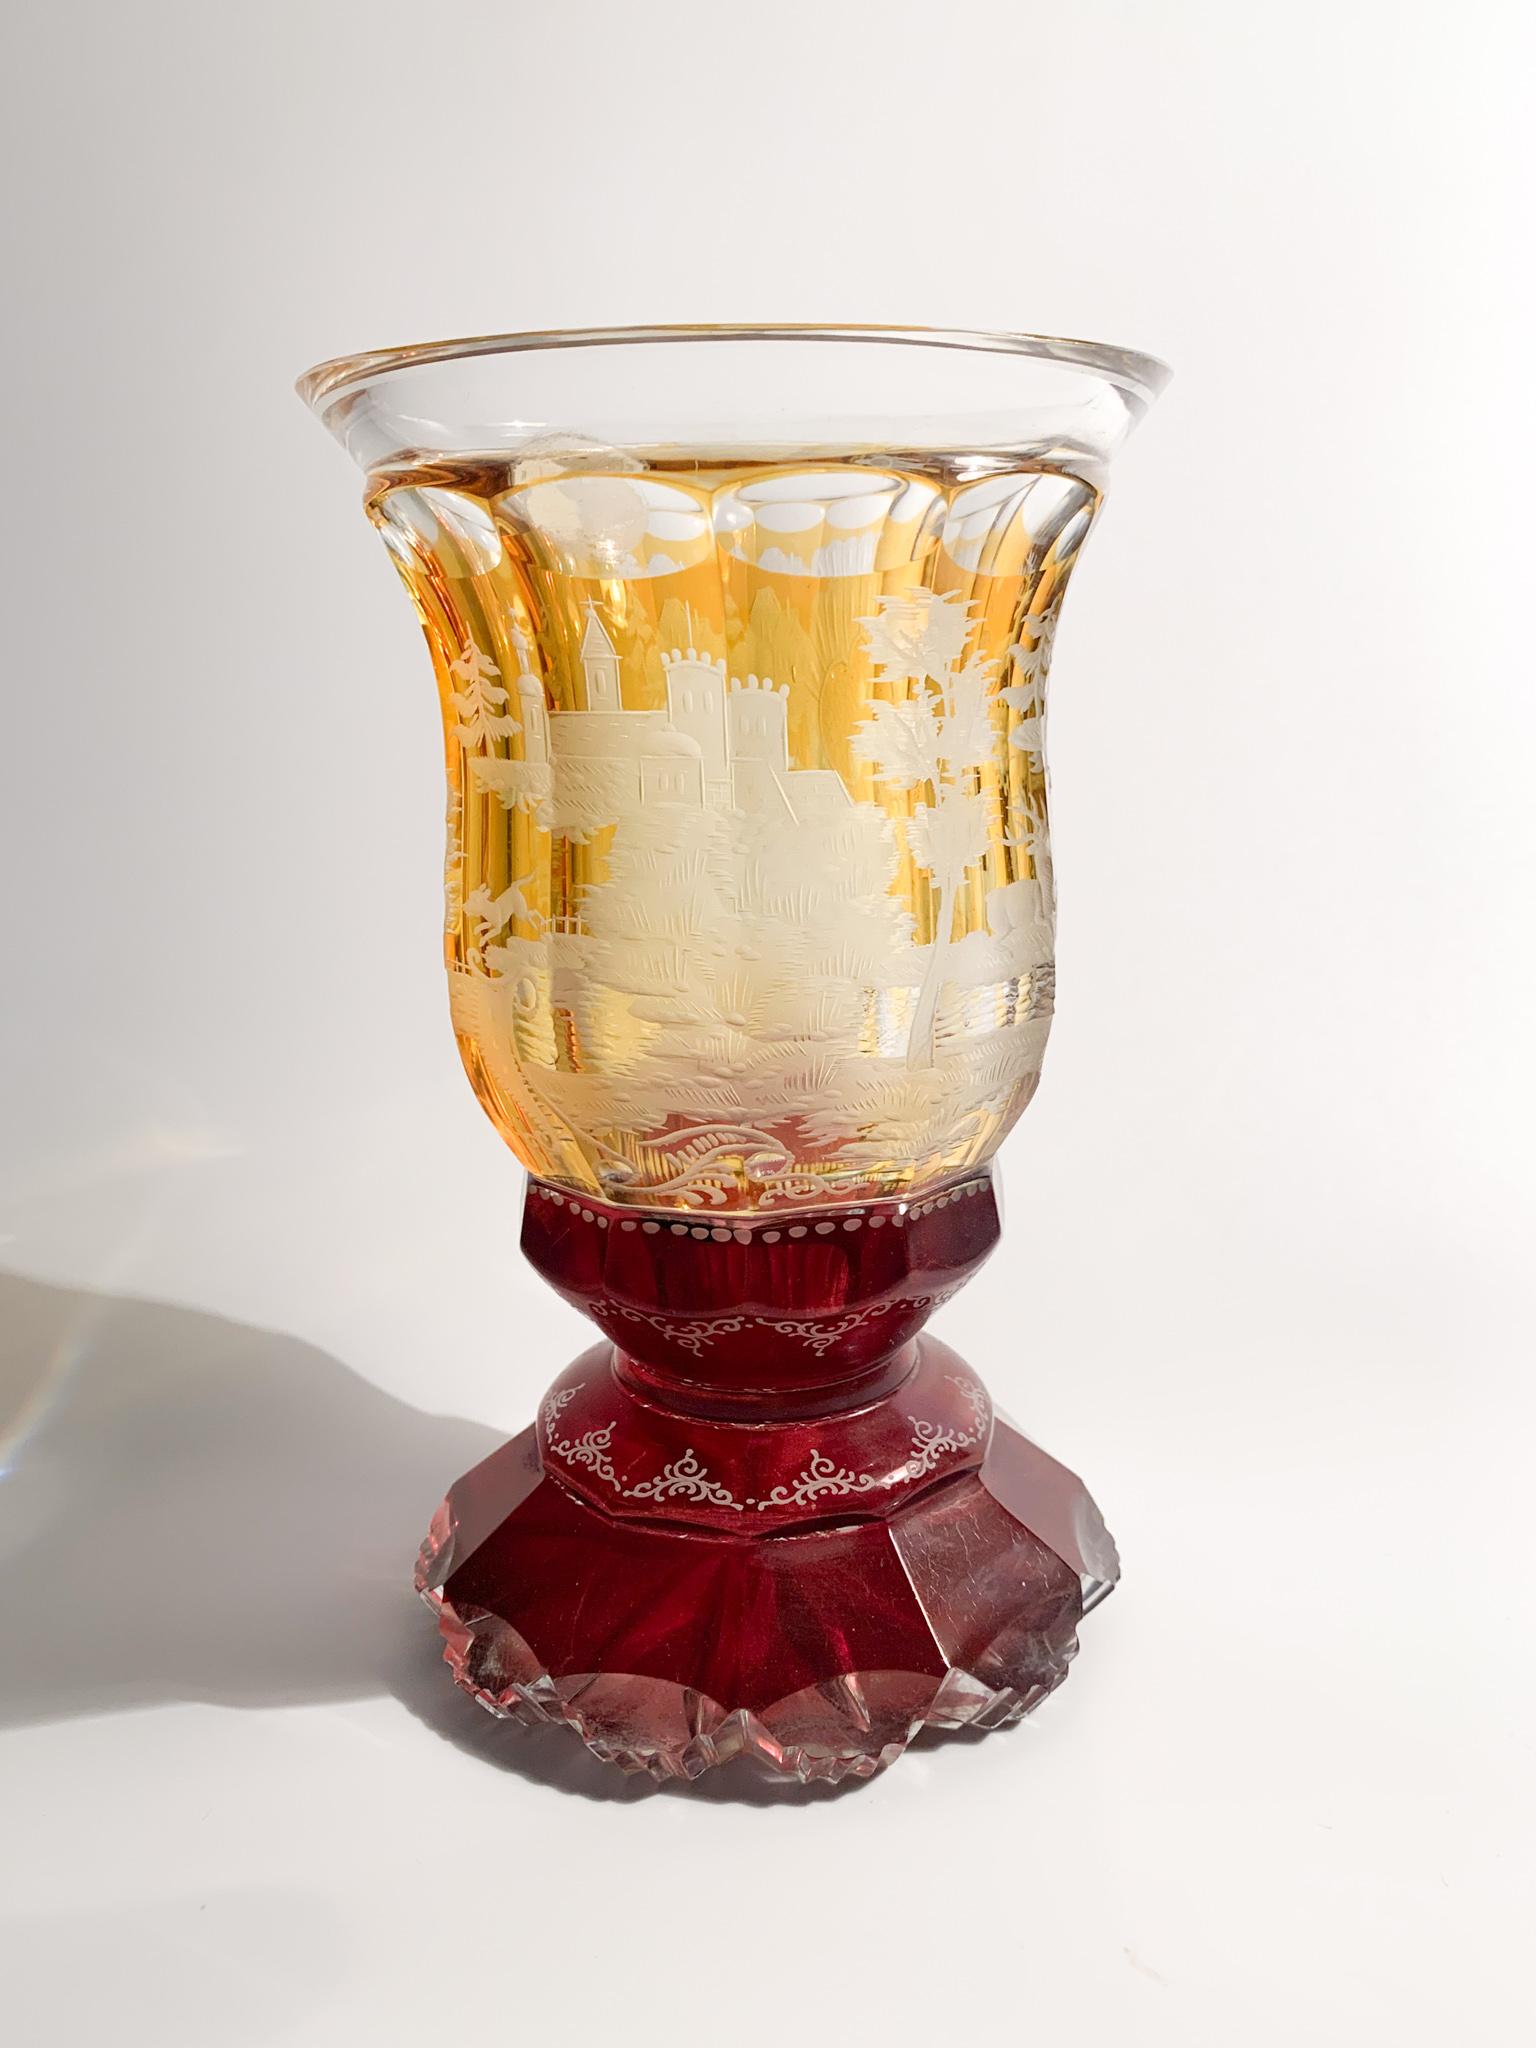 Glass in orange and red Biedermeier crystal, decorated with acid and made in 1800

Measures: Ø cm 10 H cm 16

Biedermeier is was an artistic movement that developed between 1815 and 1848. The term initially spread as a pejorative. Composed of